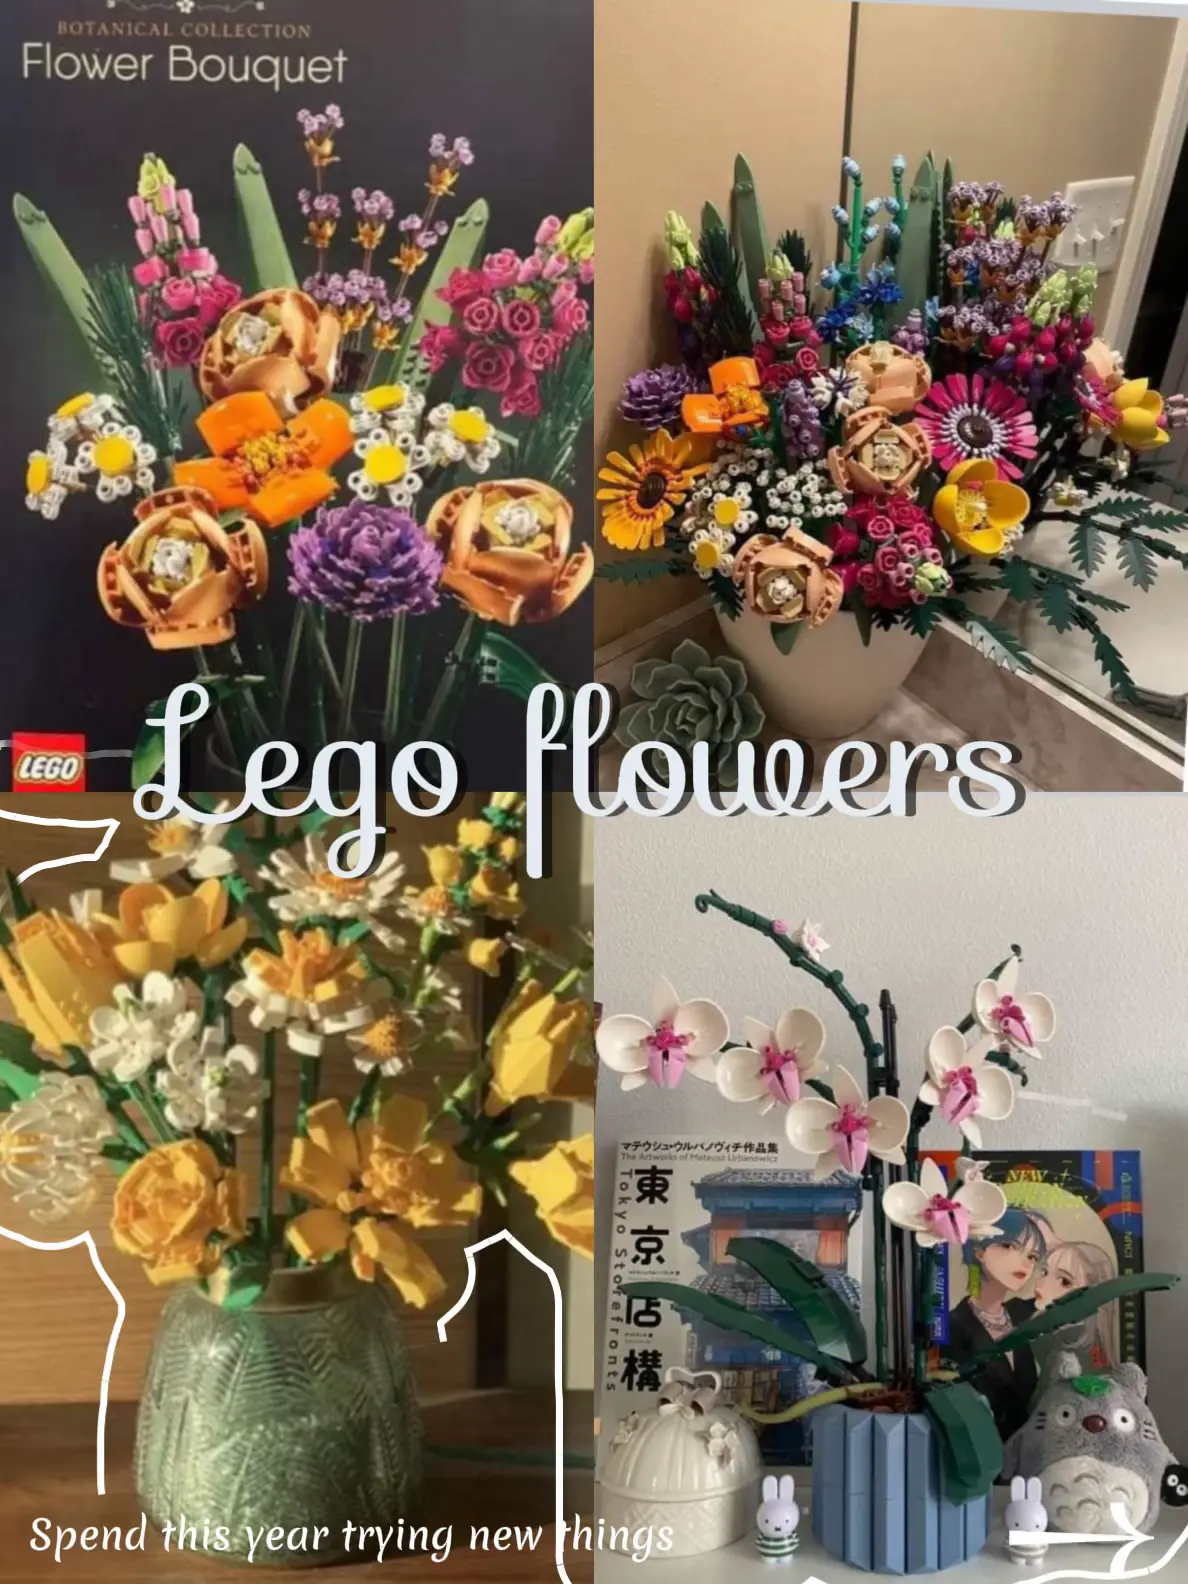 LEGO Icons Bouquet of Roses, Artificial Flowers for Home Décor, Gift for  Mother's Day, Anniversary or Any Special Day, Unique Build and Display  Model